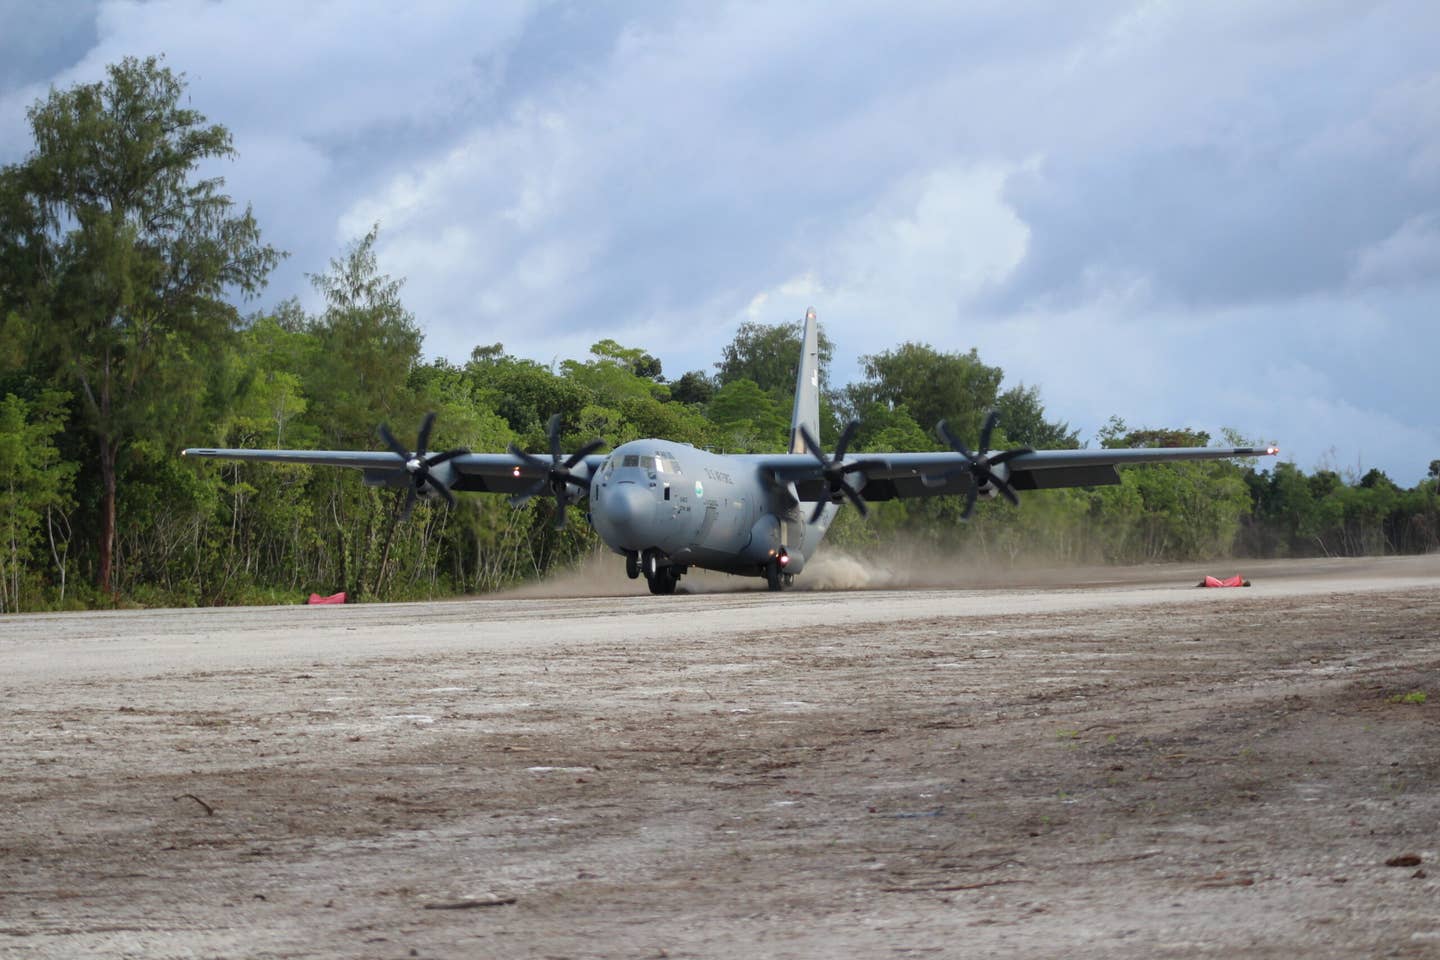 A U.S. Air Force C-130J delivers soldiers onto the newly renovated Angaur Airfield for training exercises in the Republic of Palau, September 2020. <em>US Army</em>